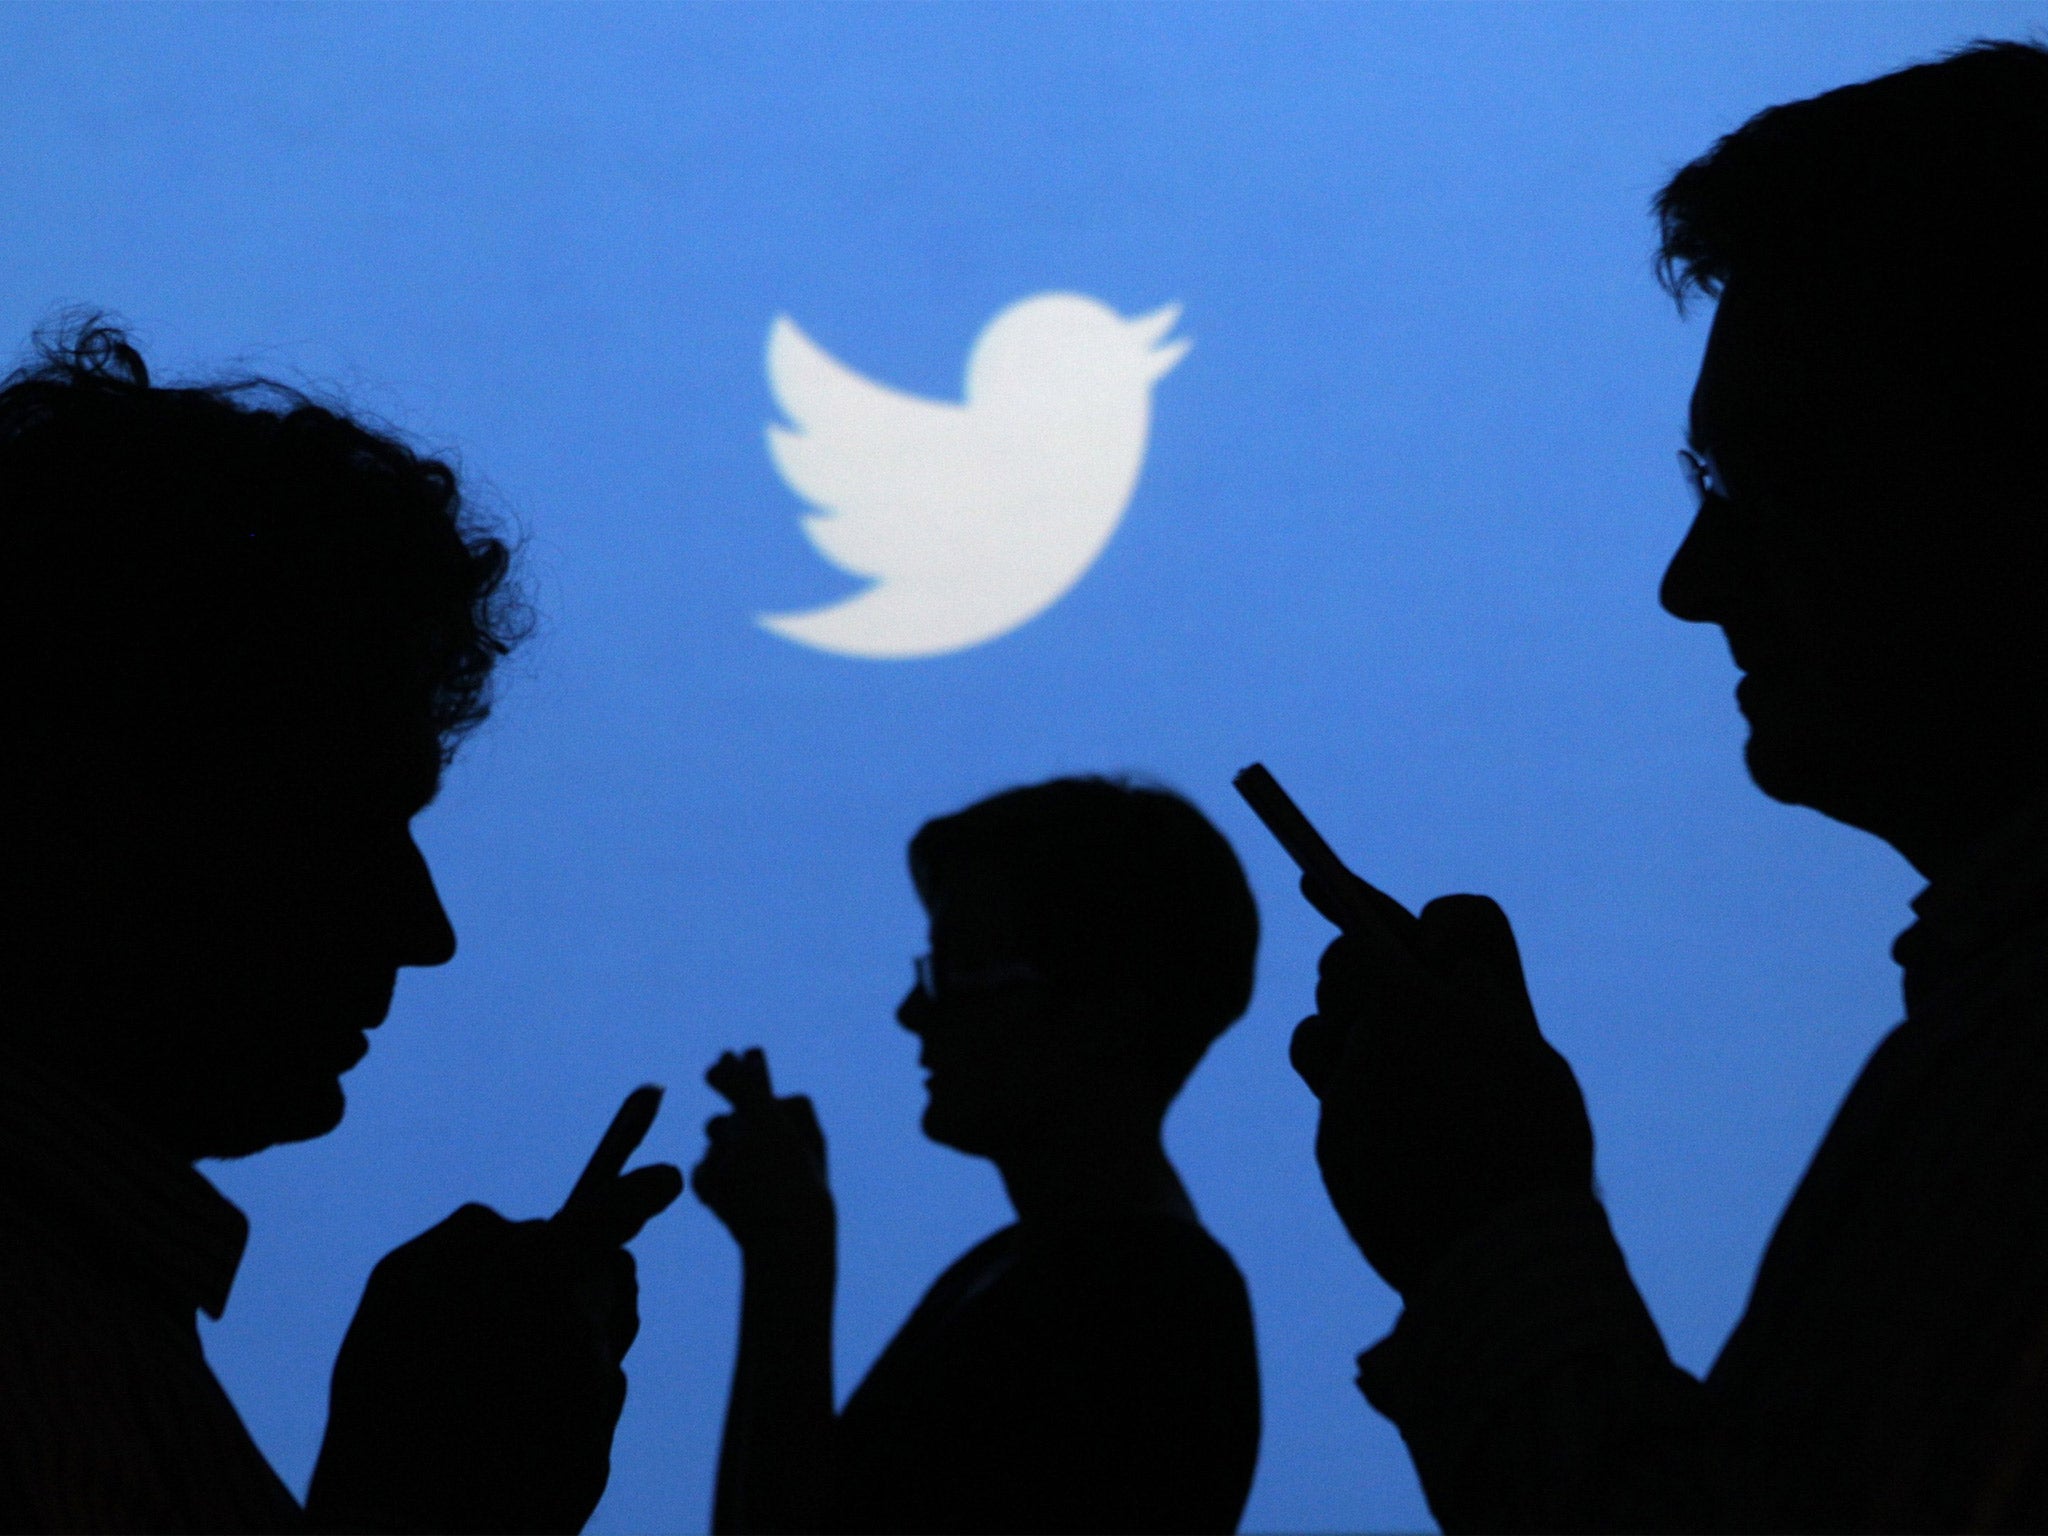 The popularity of Twitter has seen a whole industry grow up around it